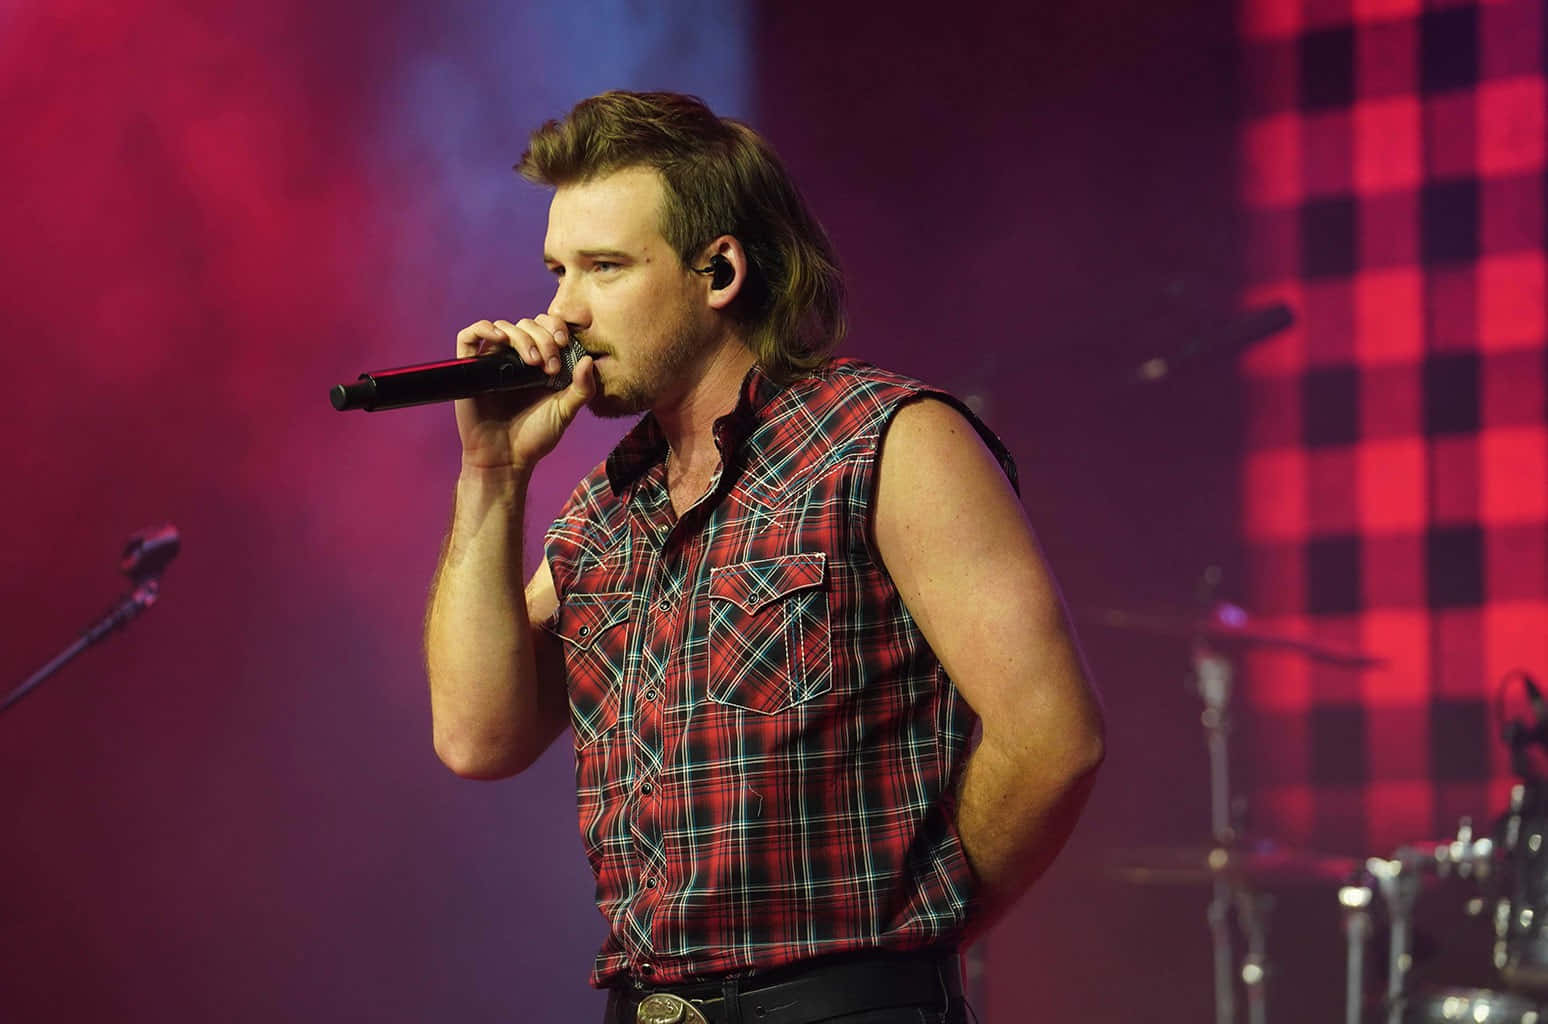 Download A Man In A Plaid Shirt Singing Into A Microphone